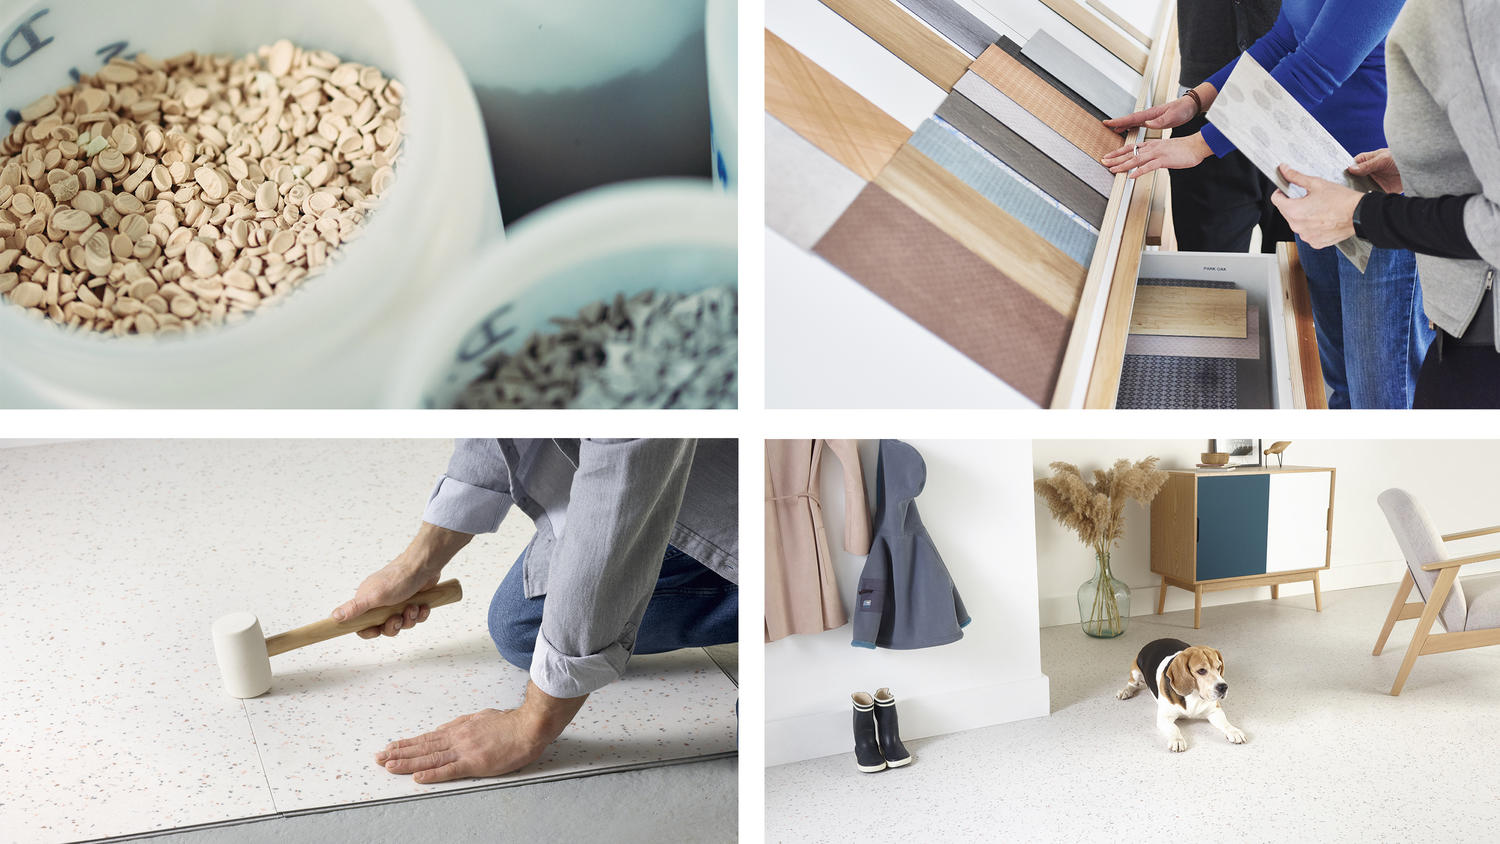 From cradle to use, see how our flooring are designed, installed and used for quality living.